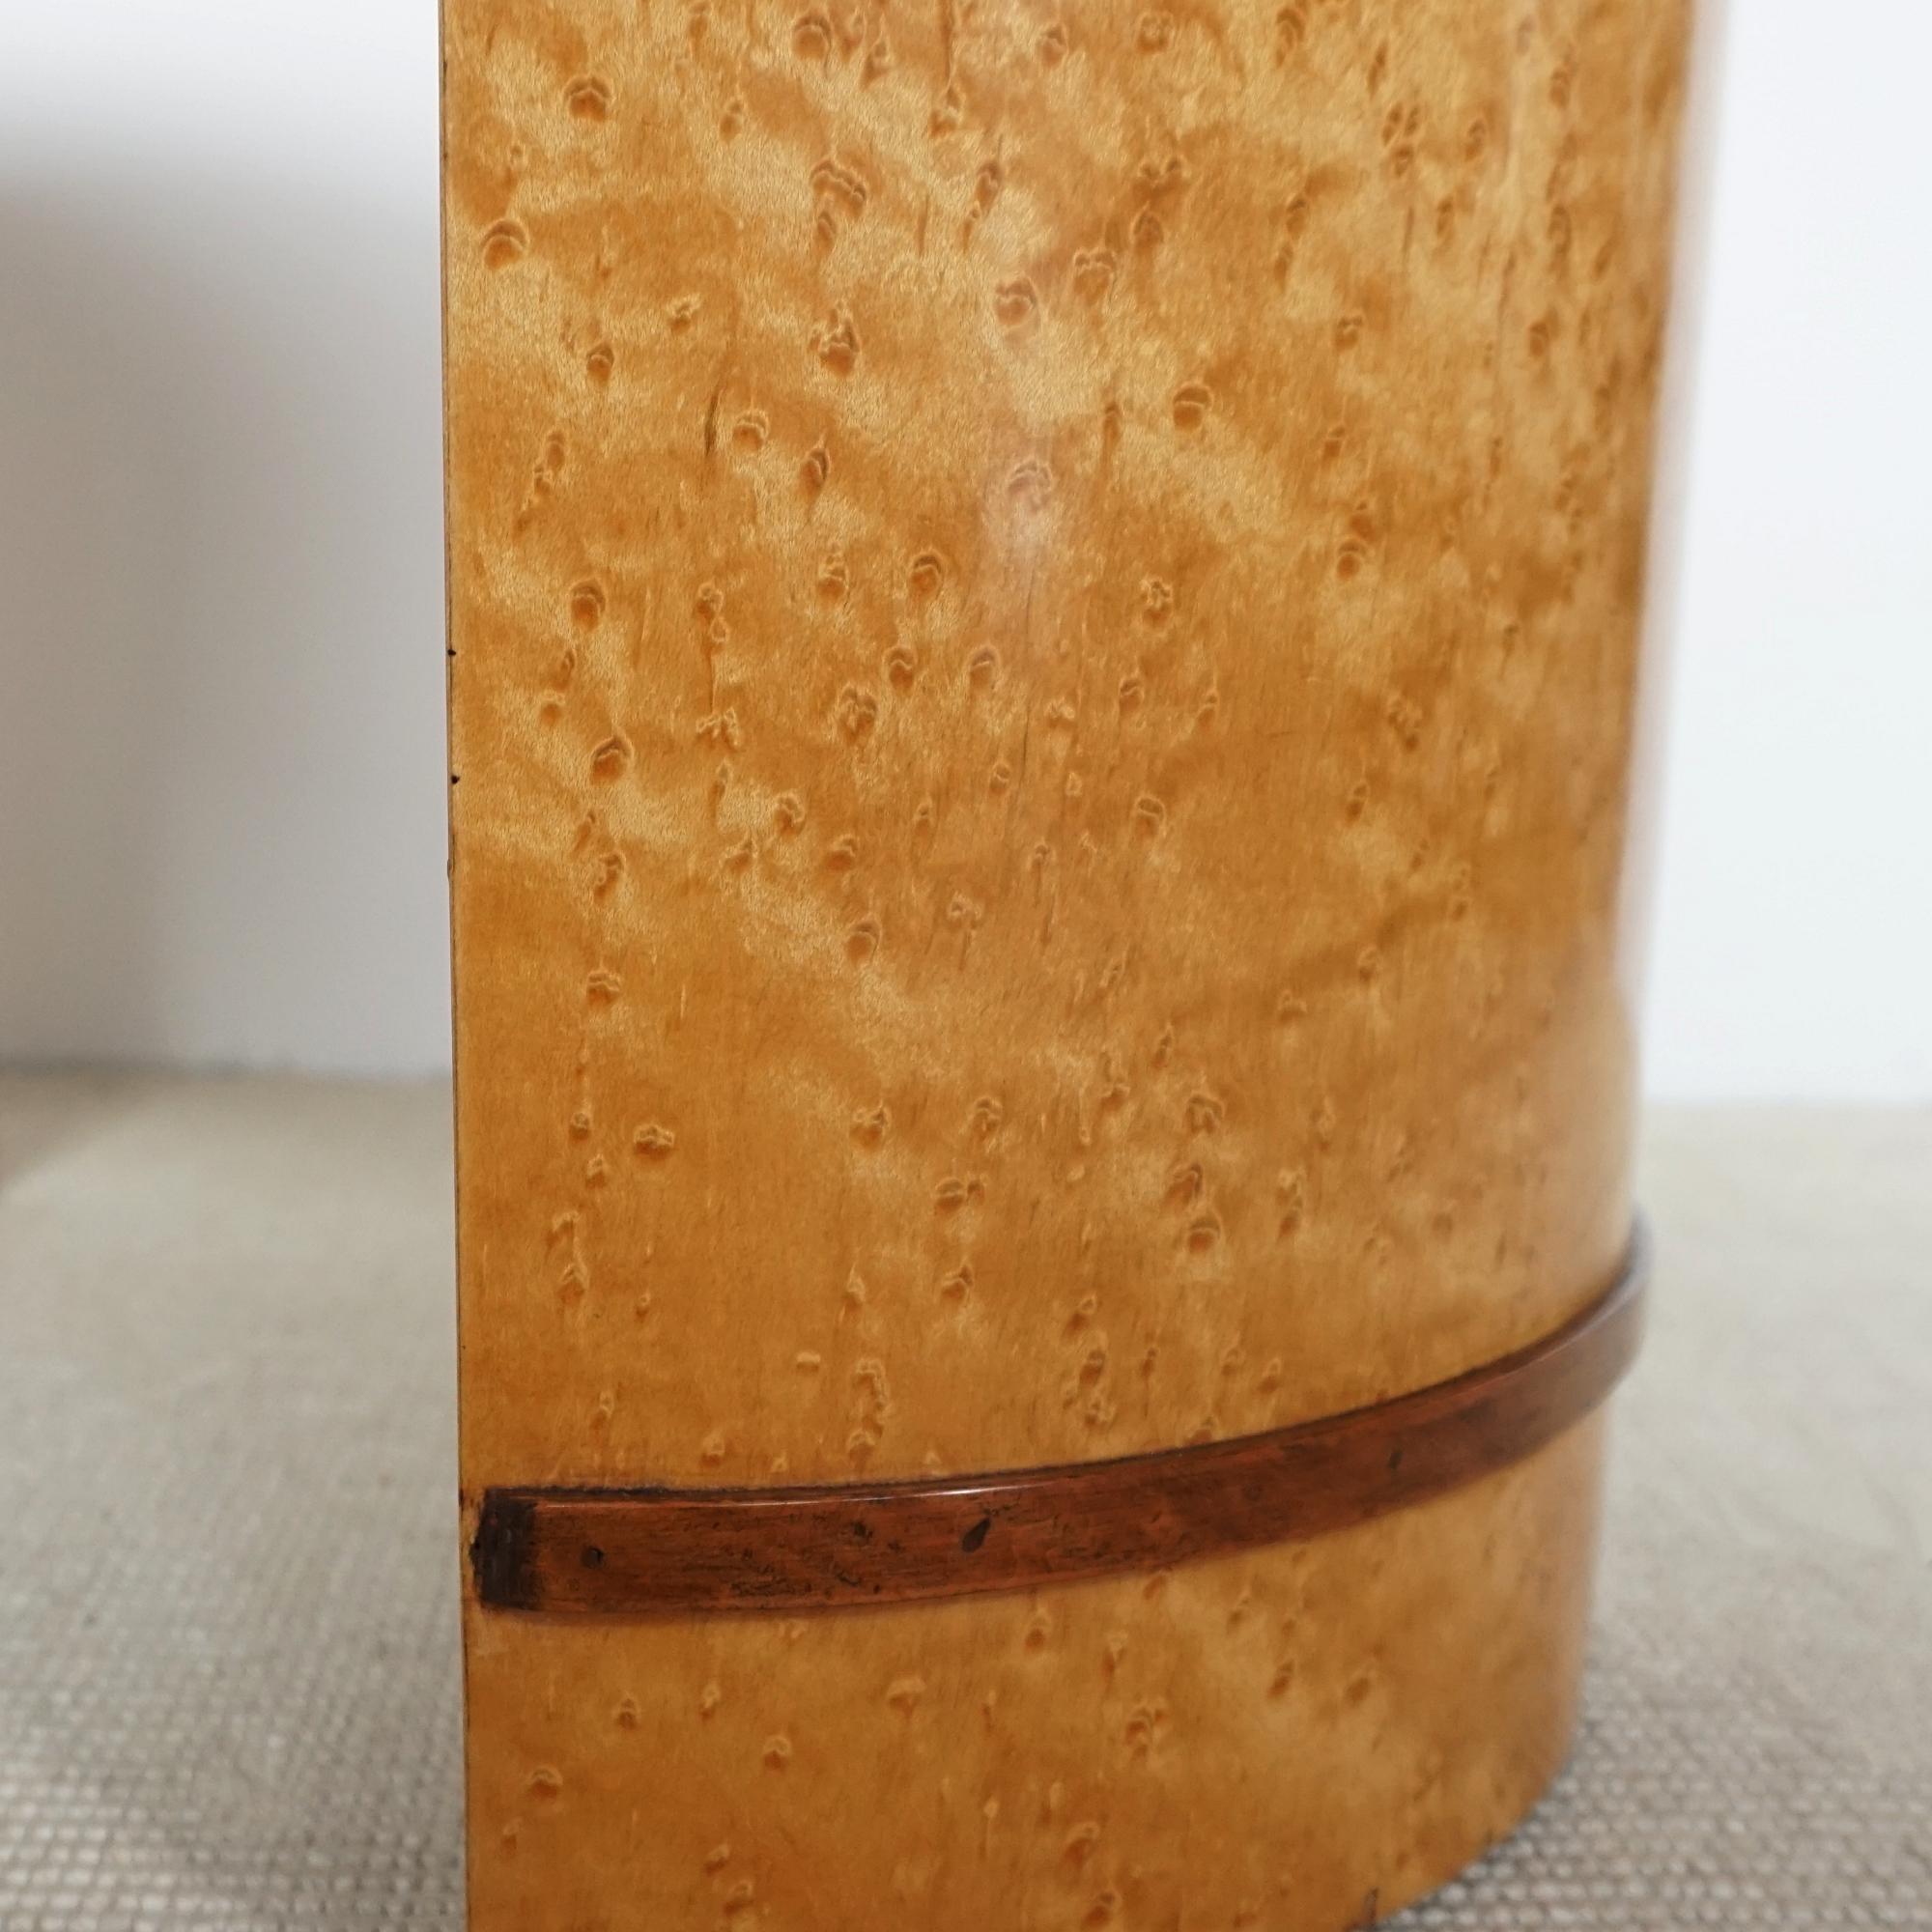 Art Deco Birdseye Maple Veneered Stool With Brown Leather Re-upholstery In Good Condition For Sale In Forest Row, East Sussex